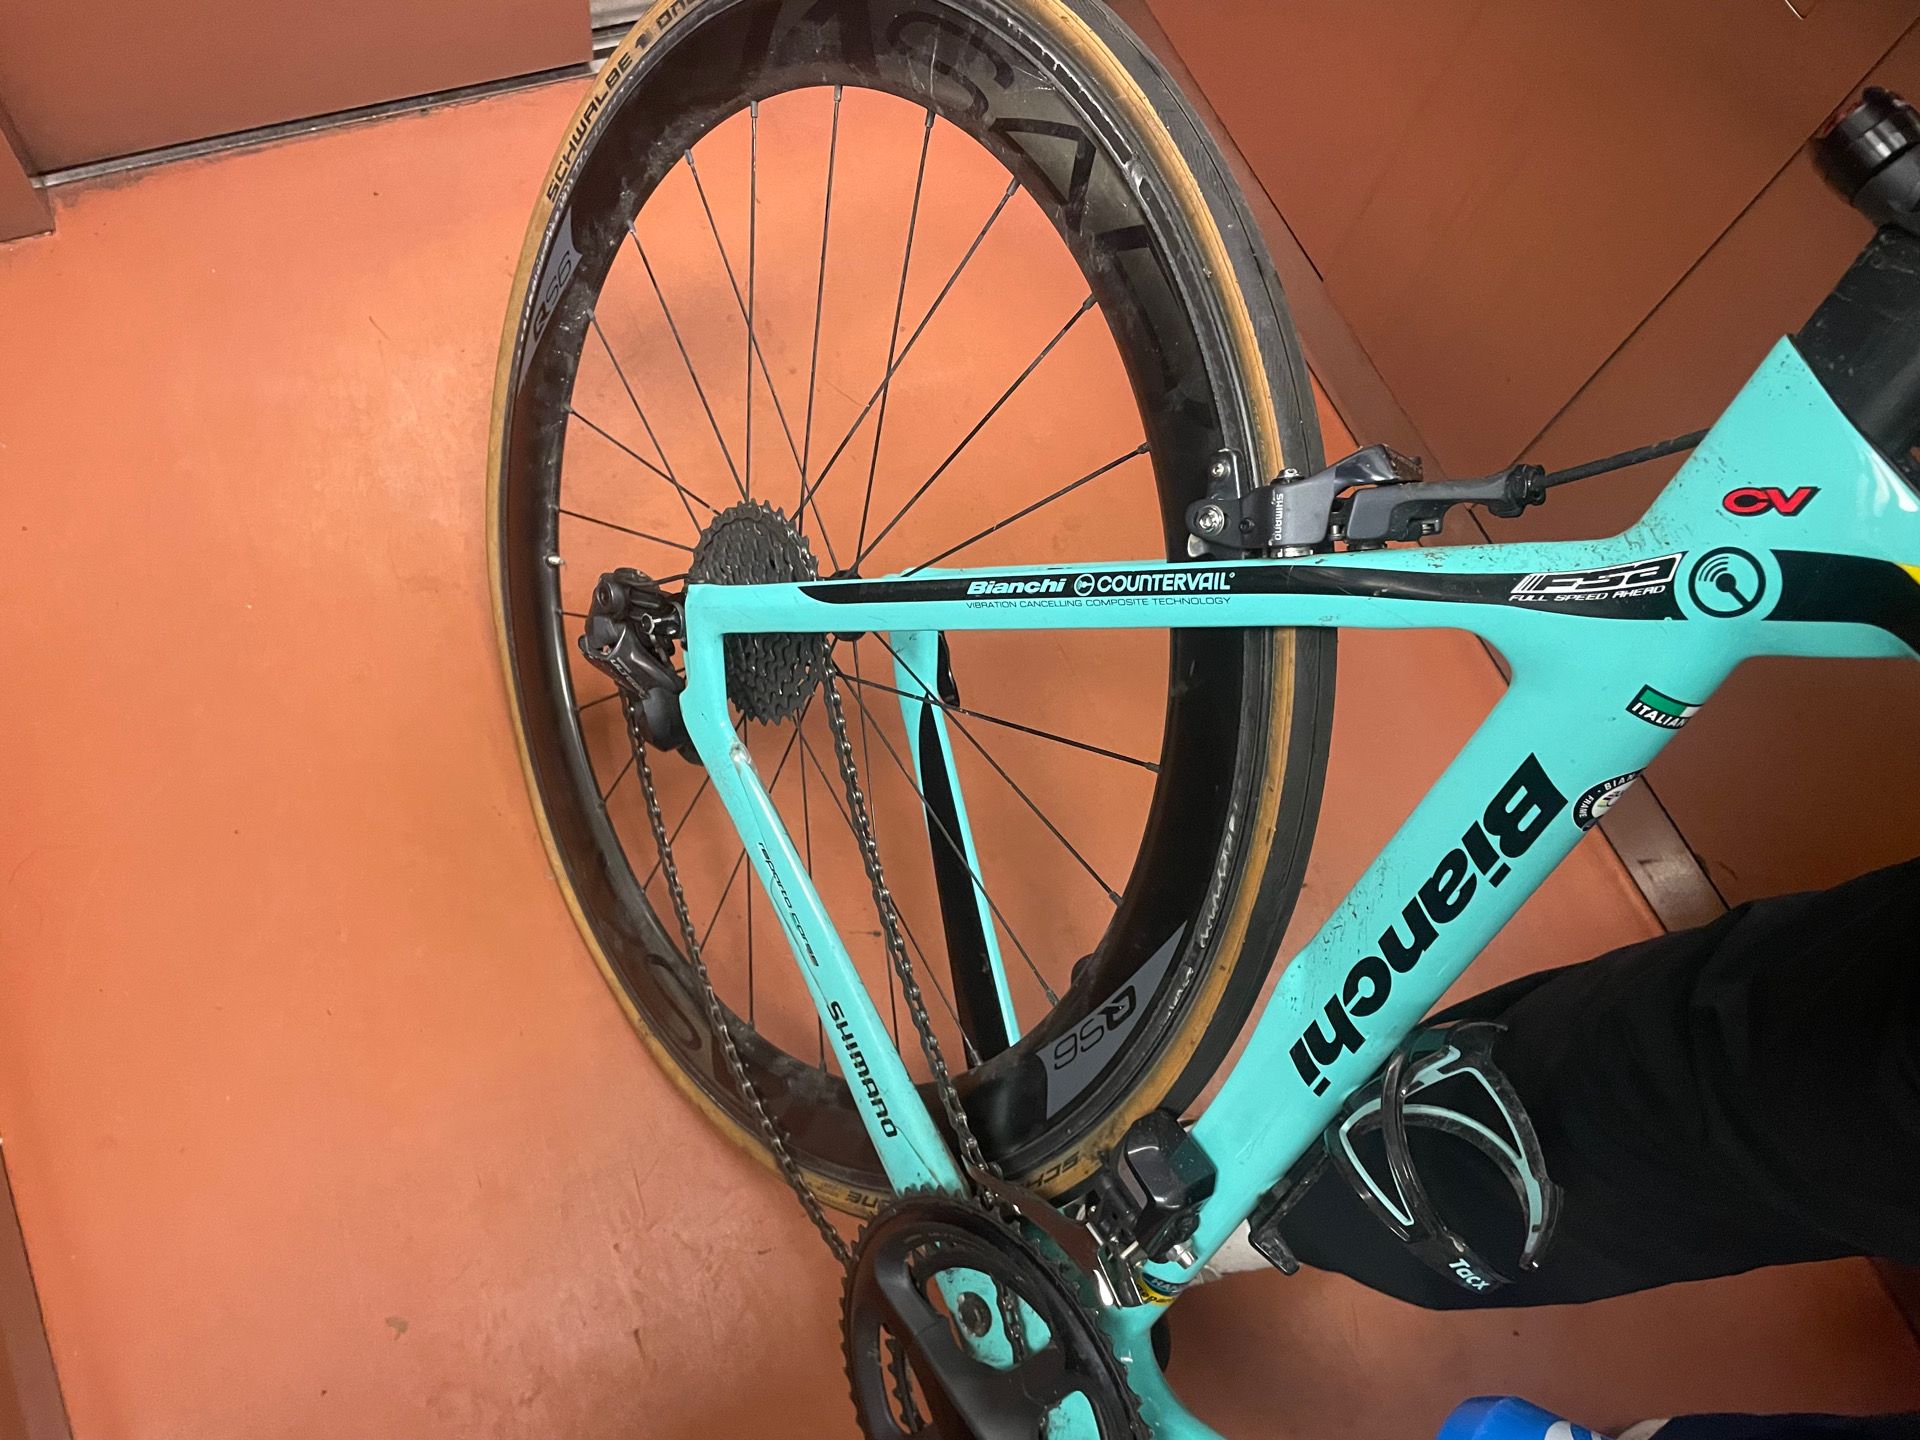 Bianchi Oltre XR.1 105 used in L | buycycle USA